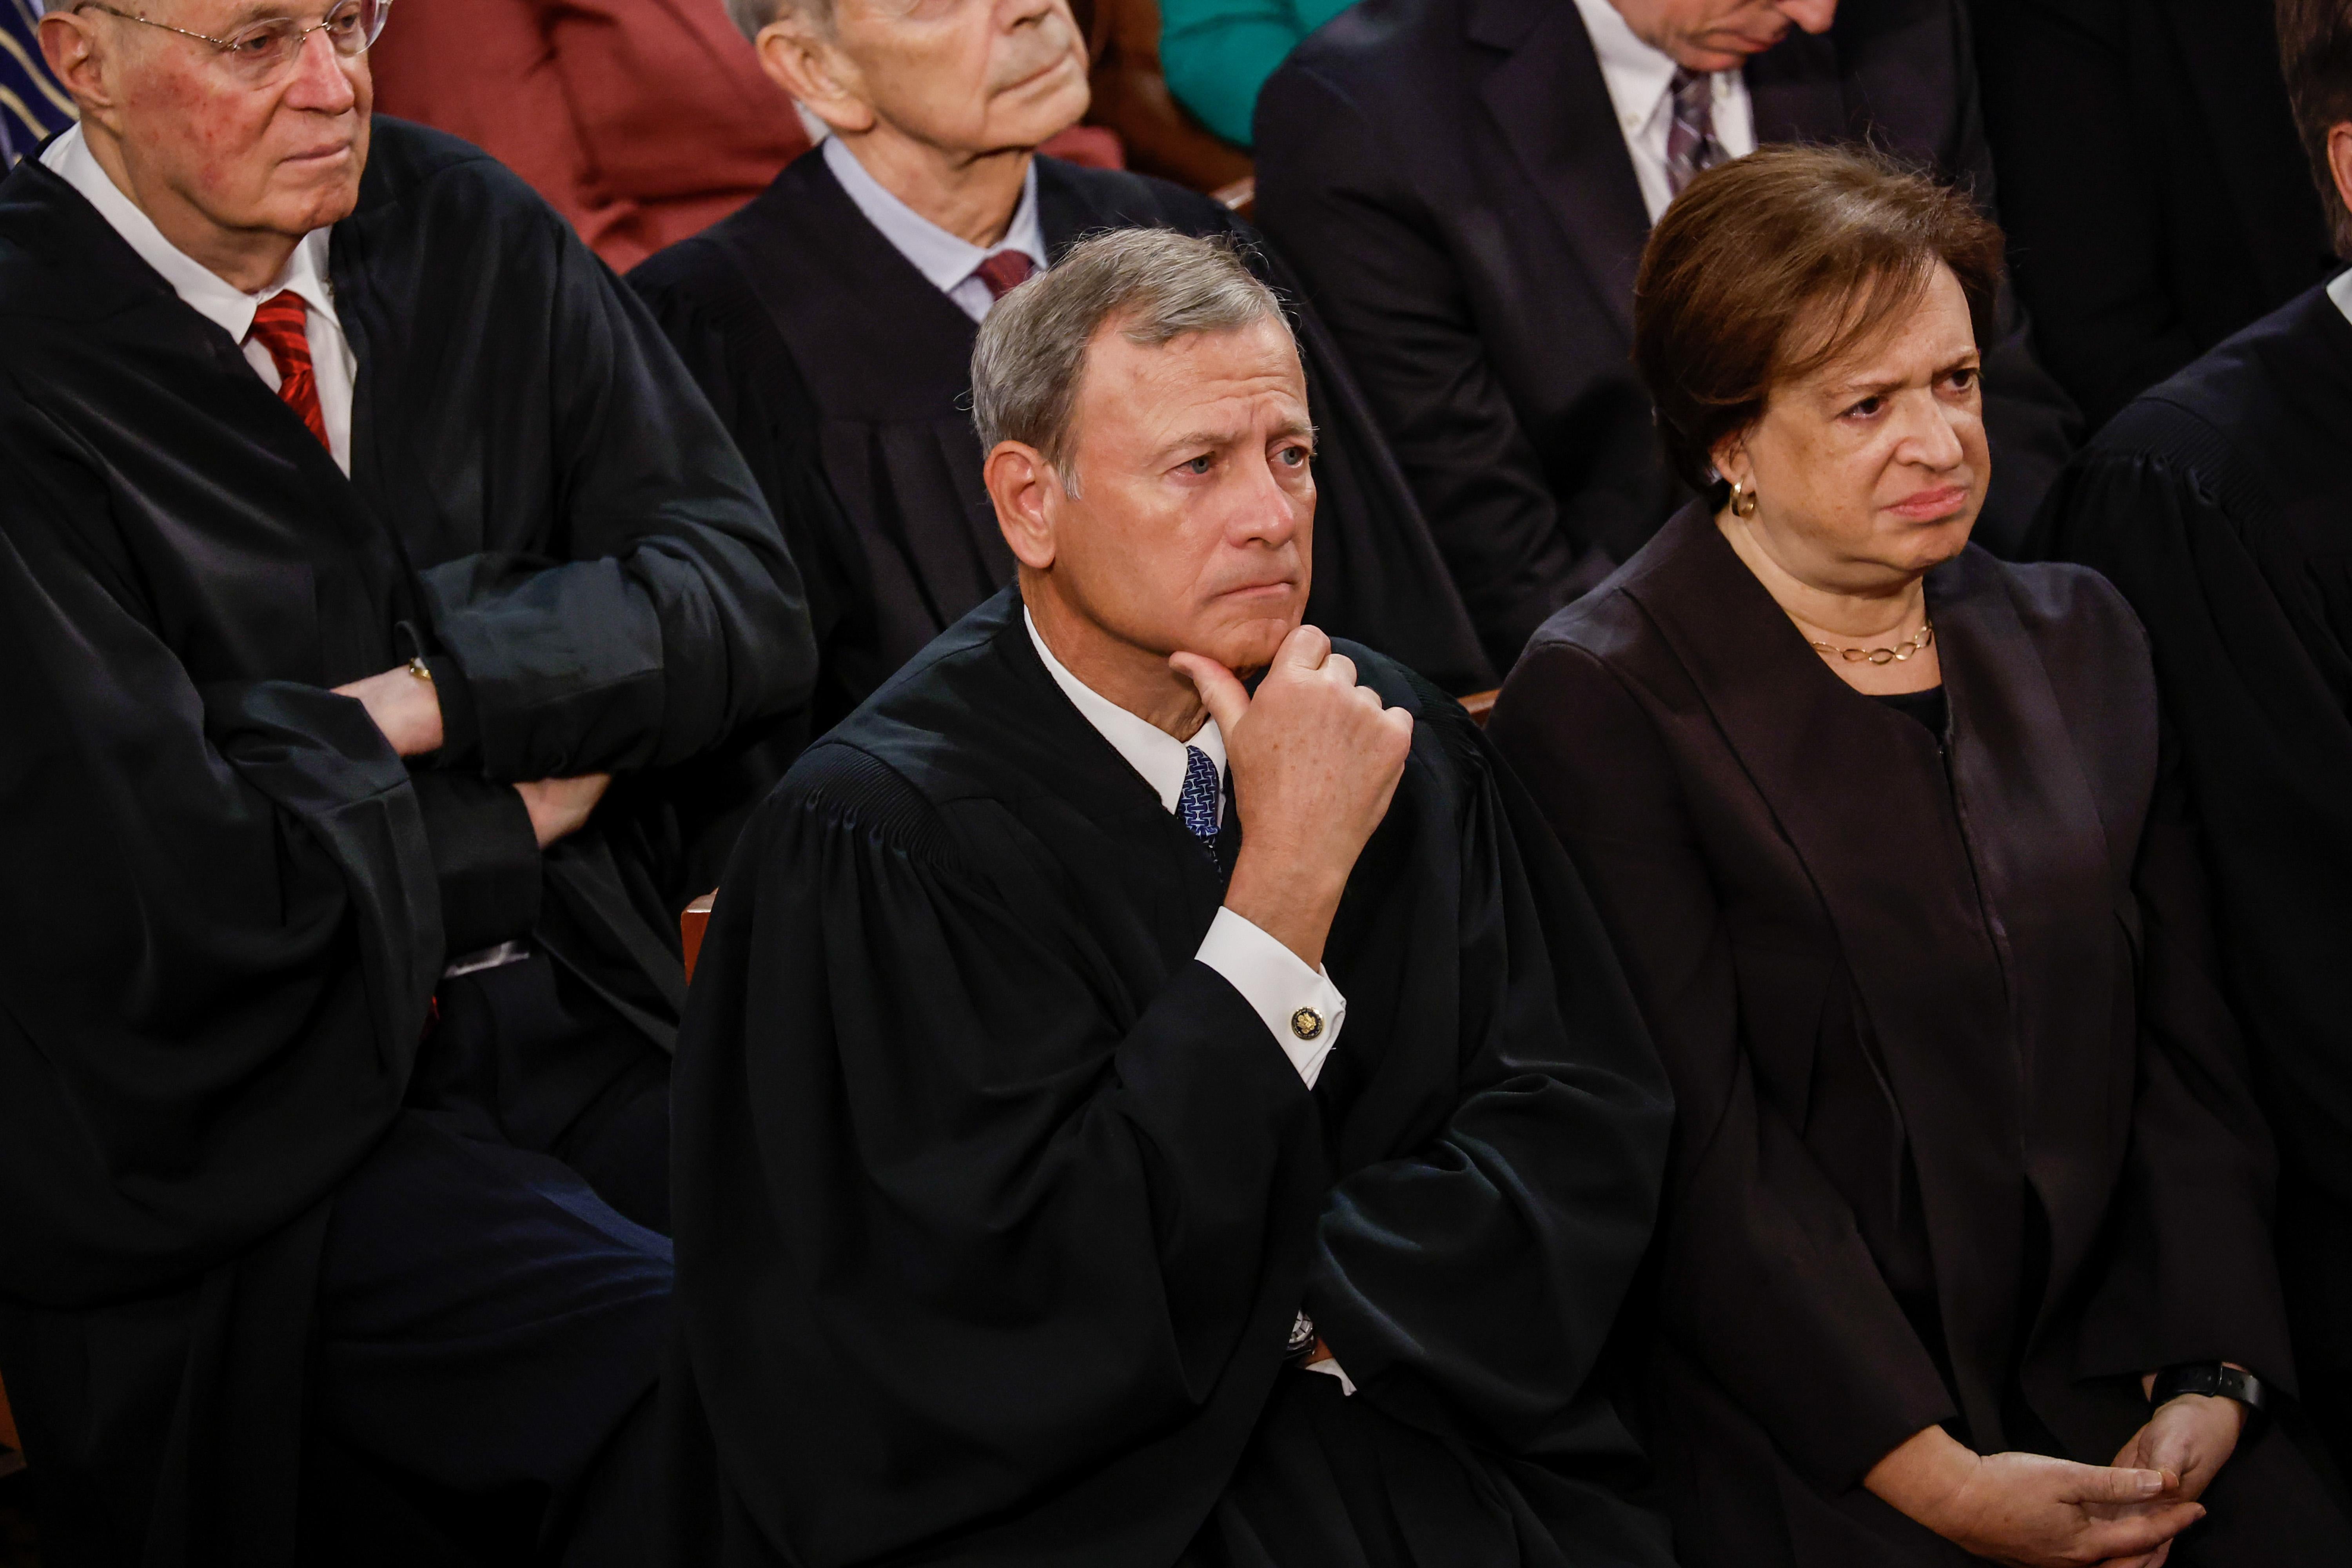 Roberts puts his hand on his chin like he's listening carefully, Kagan clasps her hand like she's doing the same.